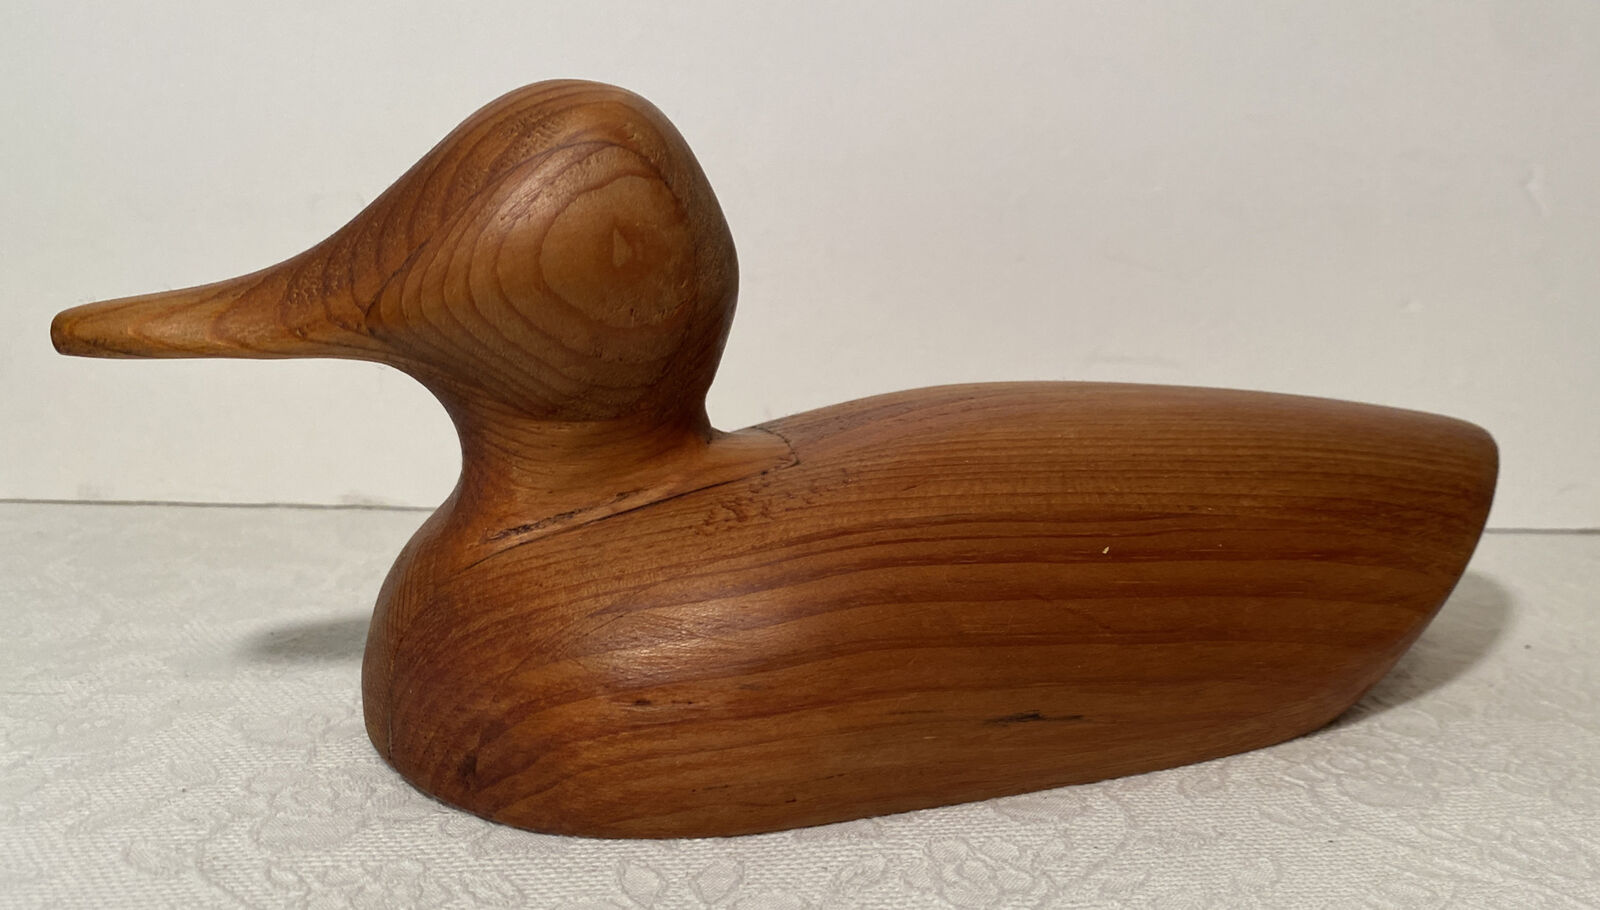 Hand Carved Unpainted Wooden Duck Decoy Wood